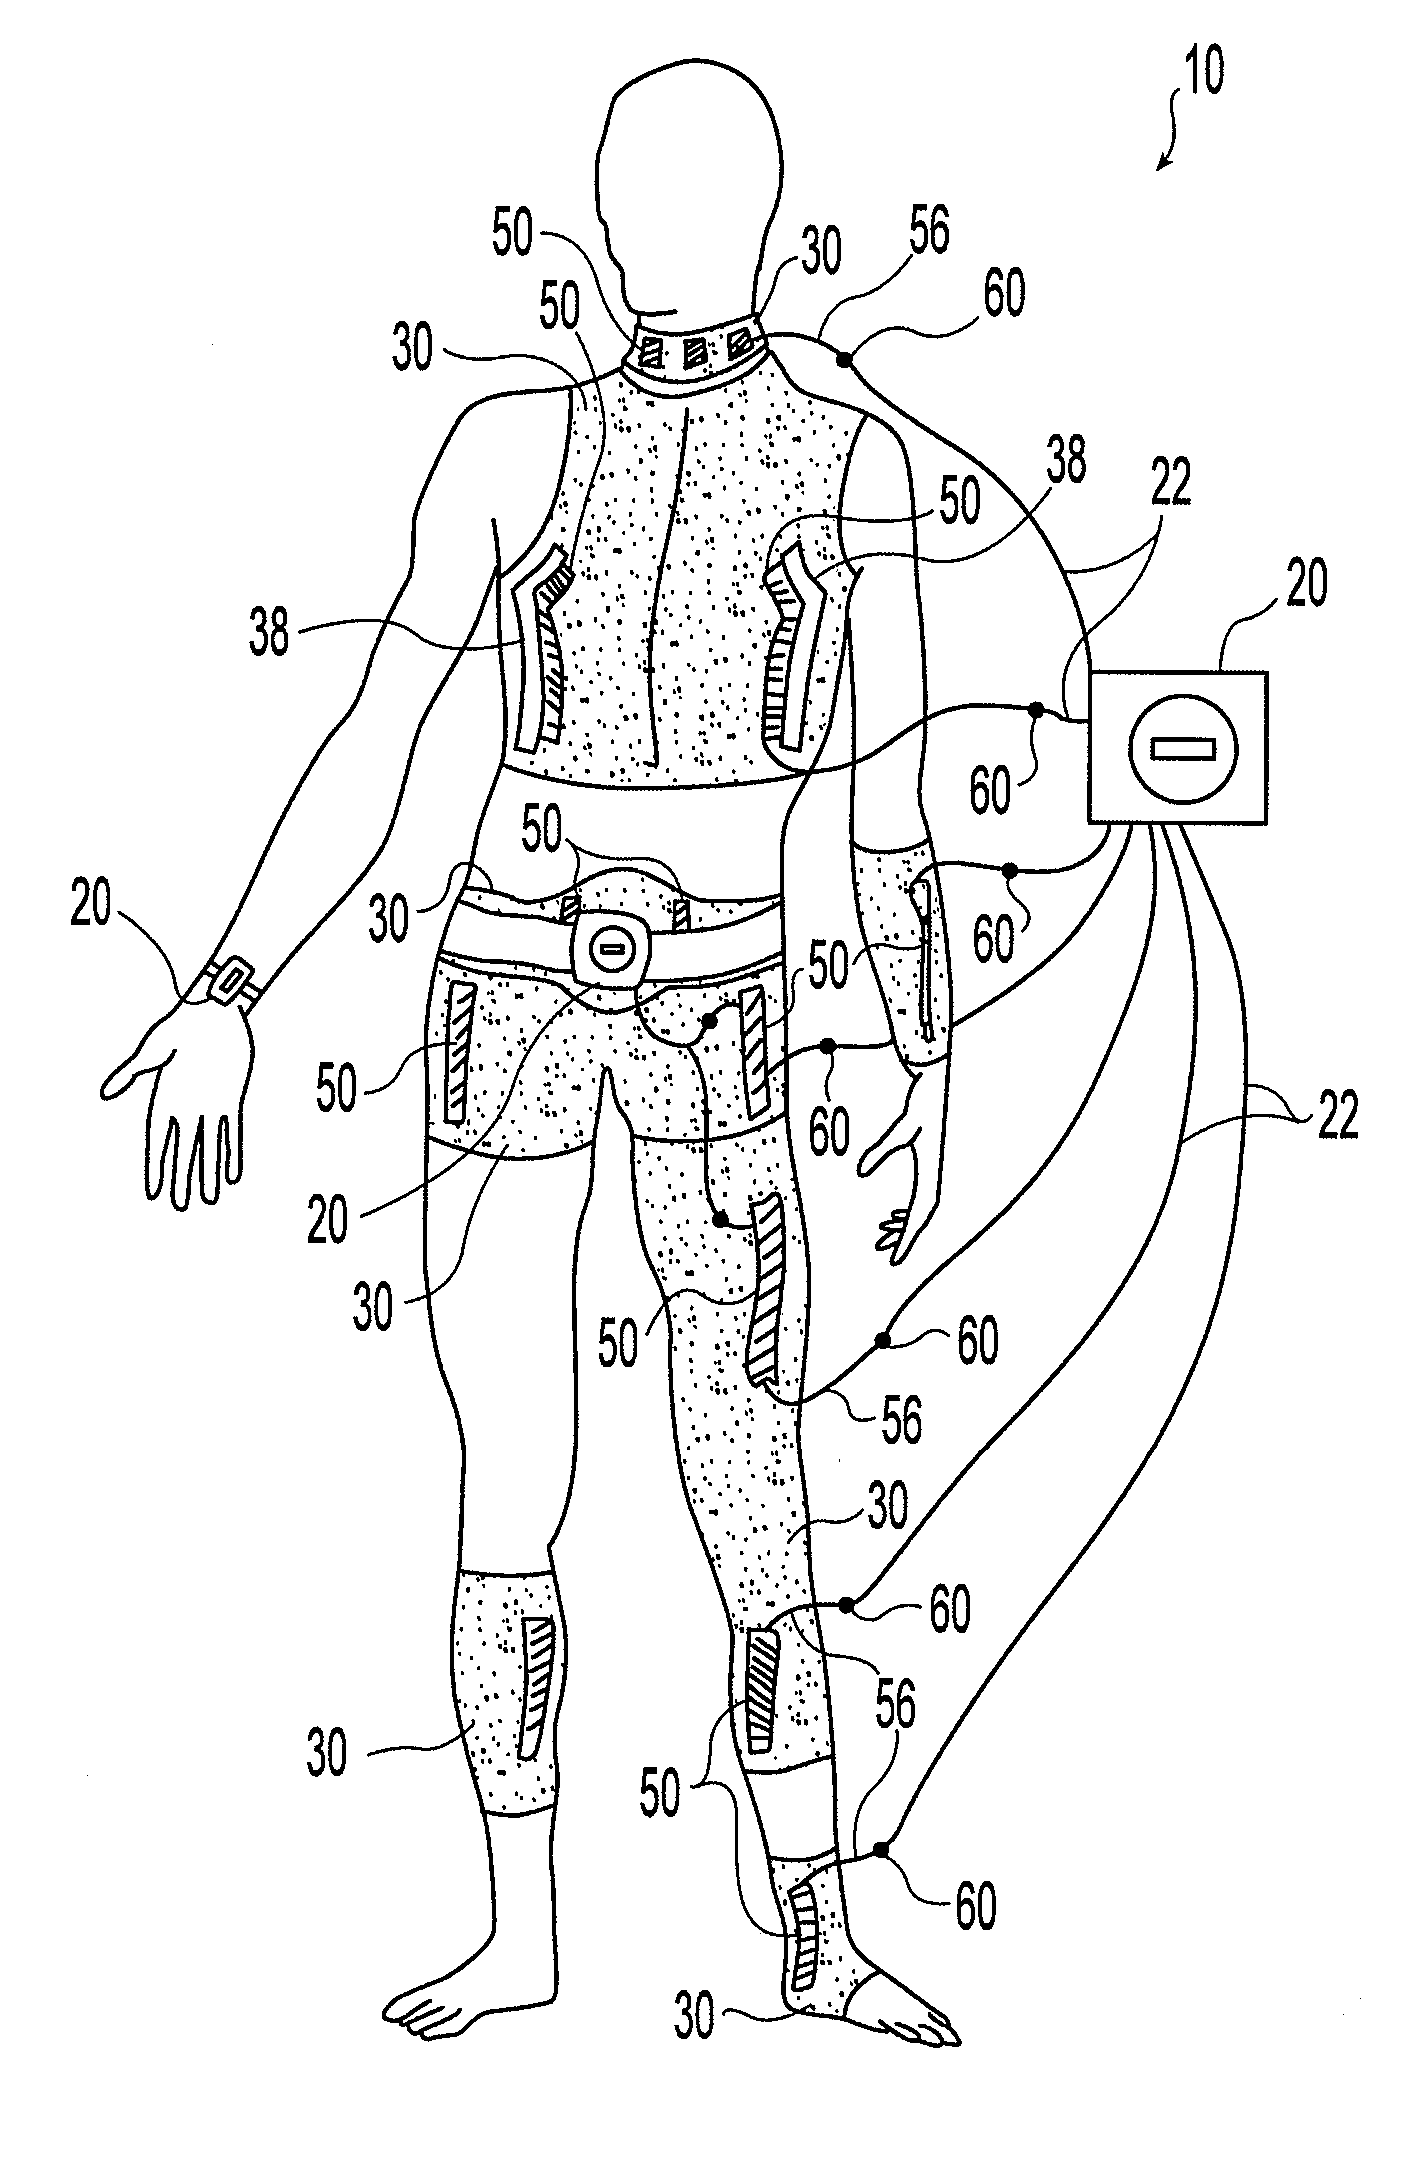 System and device for neuromuscular stimulation